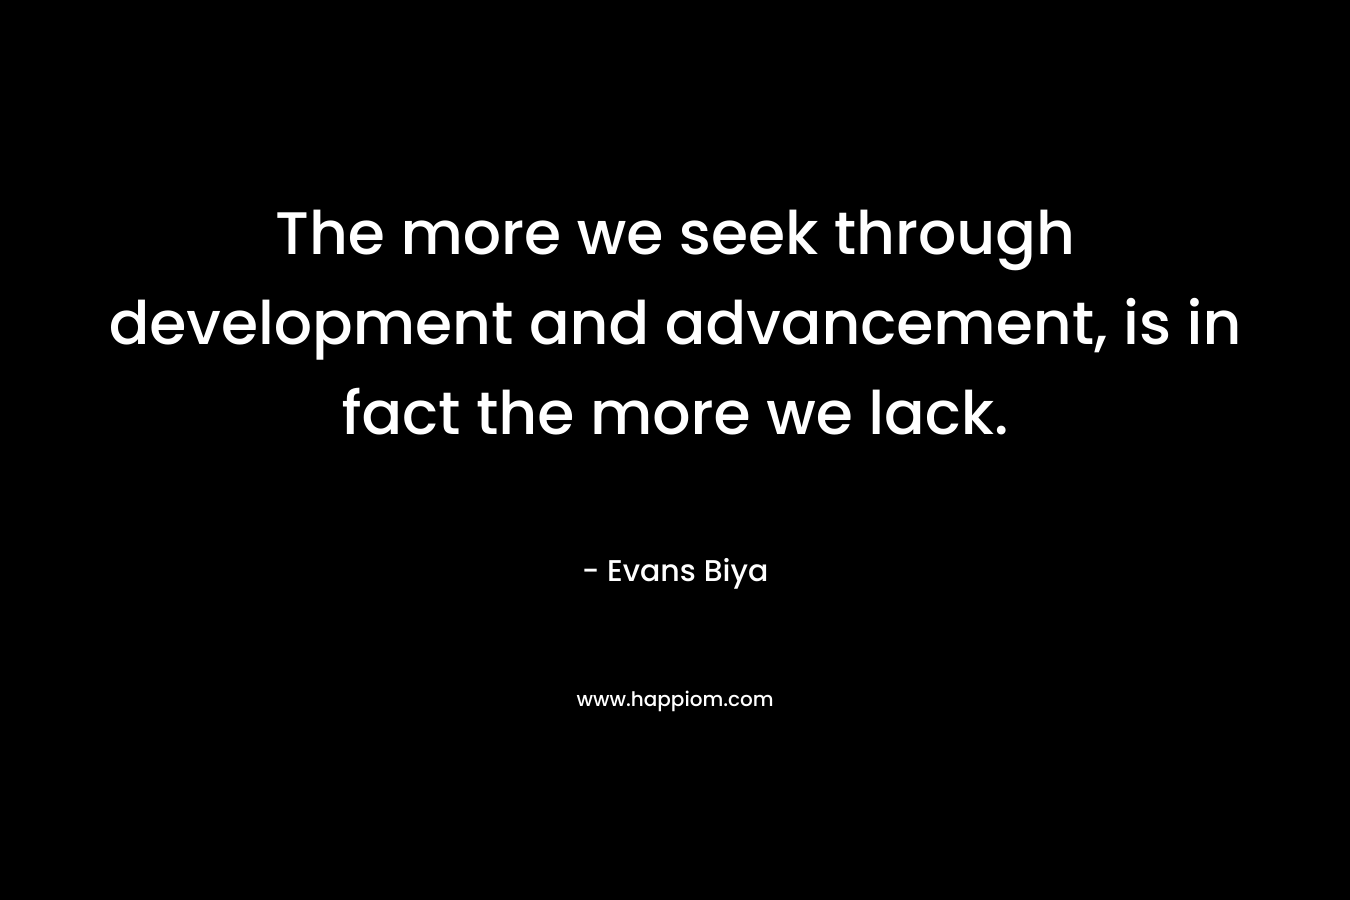 The more we seek through development and advancement, is in fact the more we lack. – Evans Biya